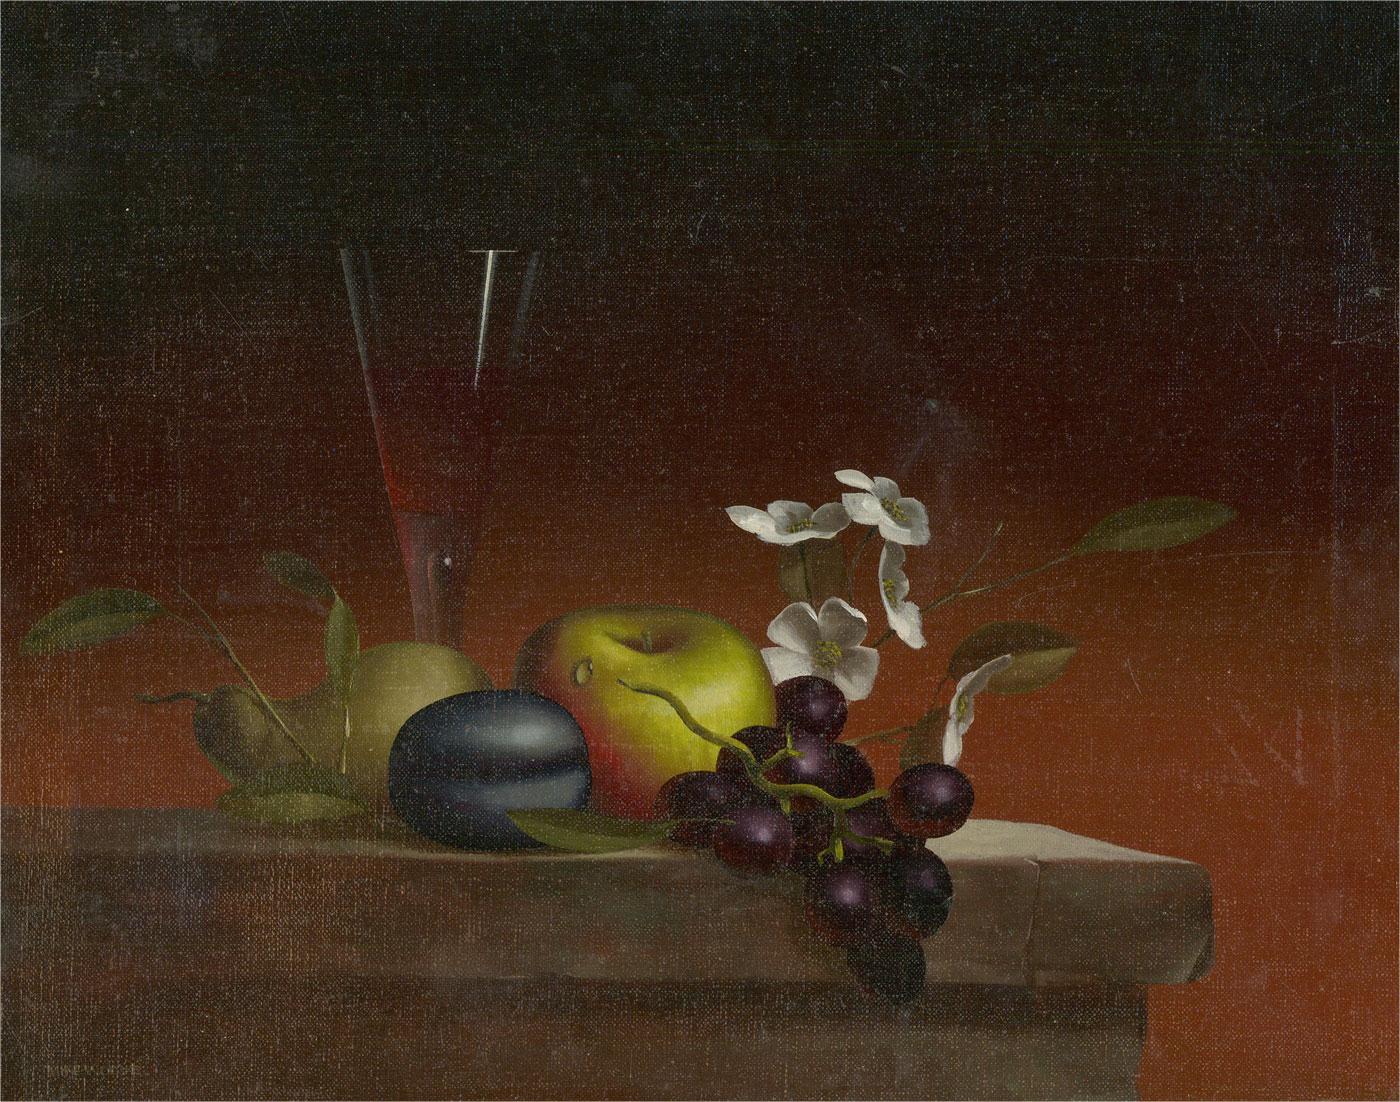 This fine study is a hyper-realist take on a traditional still life, depicting fruit, flowers and wine. The artist has used exquisite detail from the flesh of the fruit to the delicate white blossoms, Woods perfectly captures the light and texture